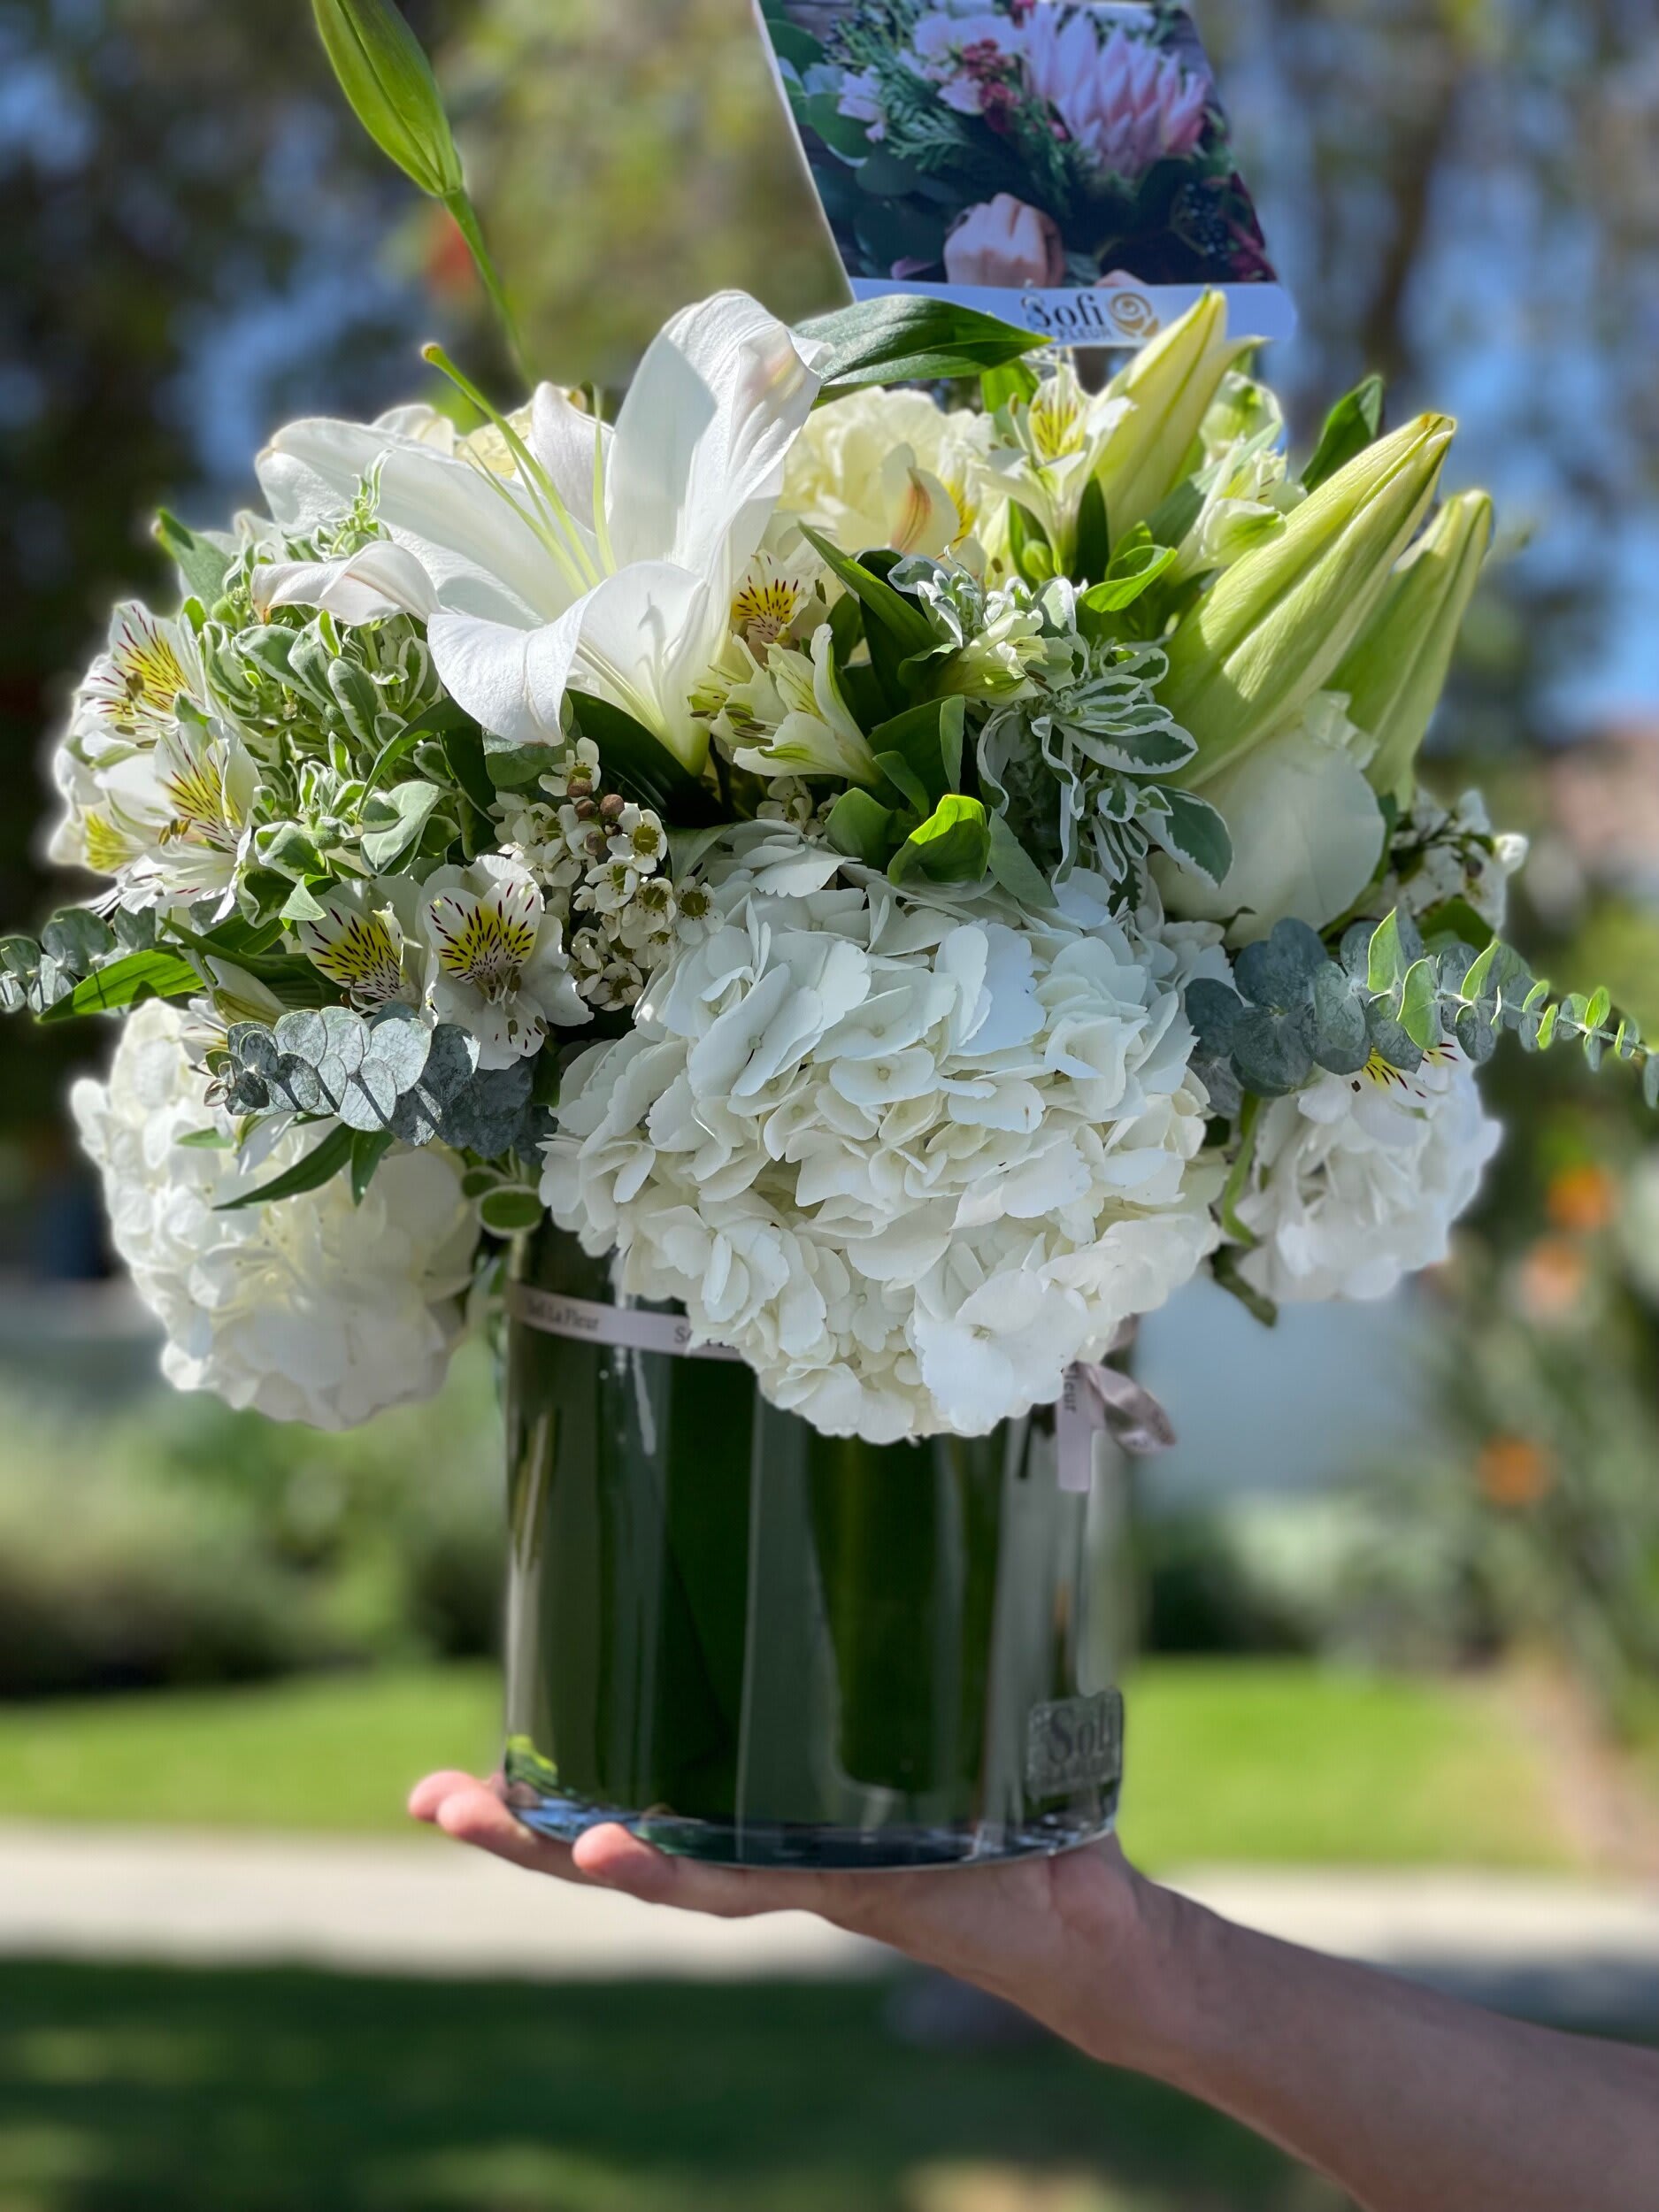 Elegant White - A simply splendid way to surprise someone special! Hand-delivered in a stylish, vase, This sophisticated, sunshiny arrangement of hydrangea and roses is an instant pick-me-up ! This chic arrangement includes miniature green hydrangea,  white roses, white alstroemeria,  green carnations, green button spray chrysanthemums, galax leaves and a ti leaf. Delivered in a clear glass vase. 